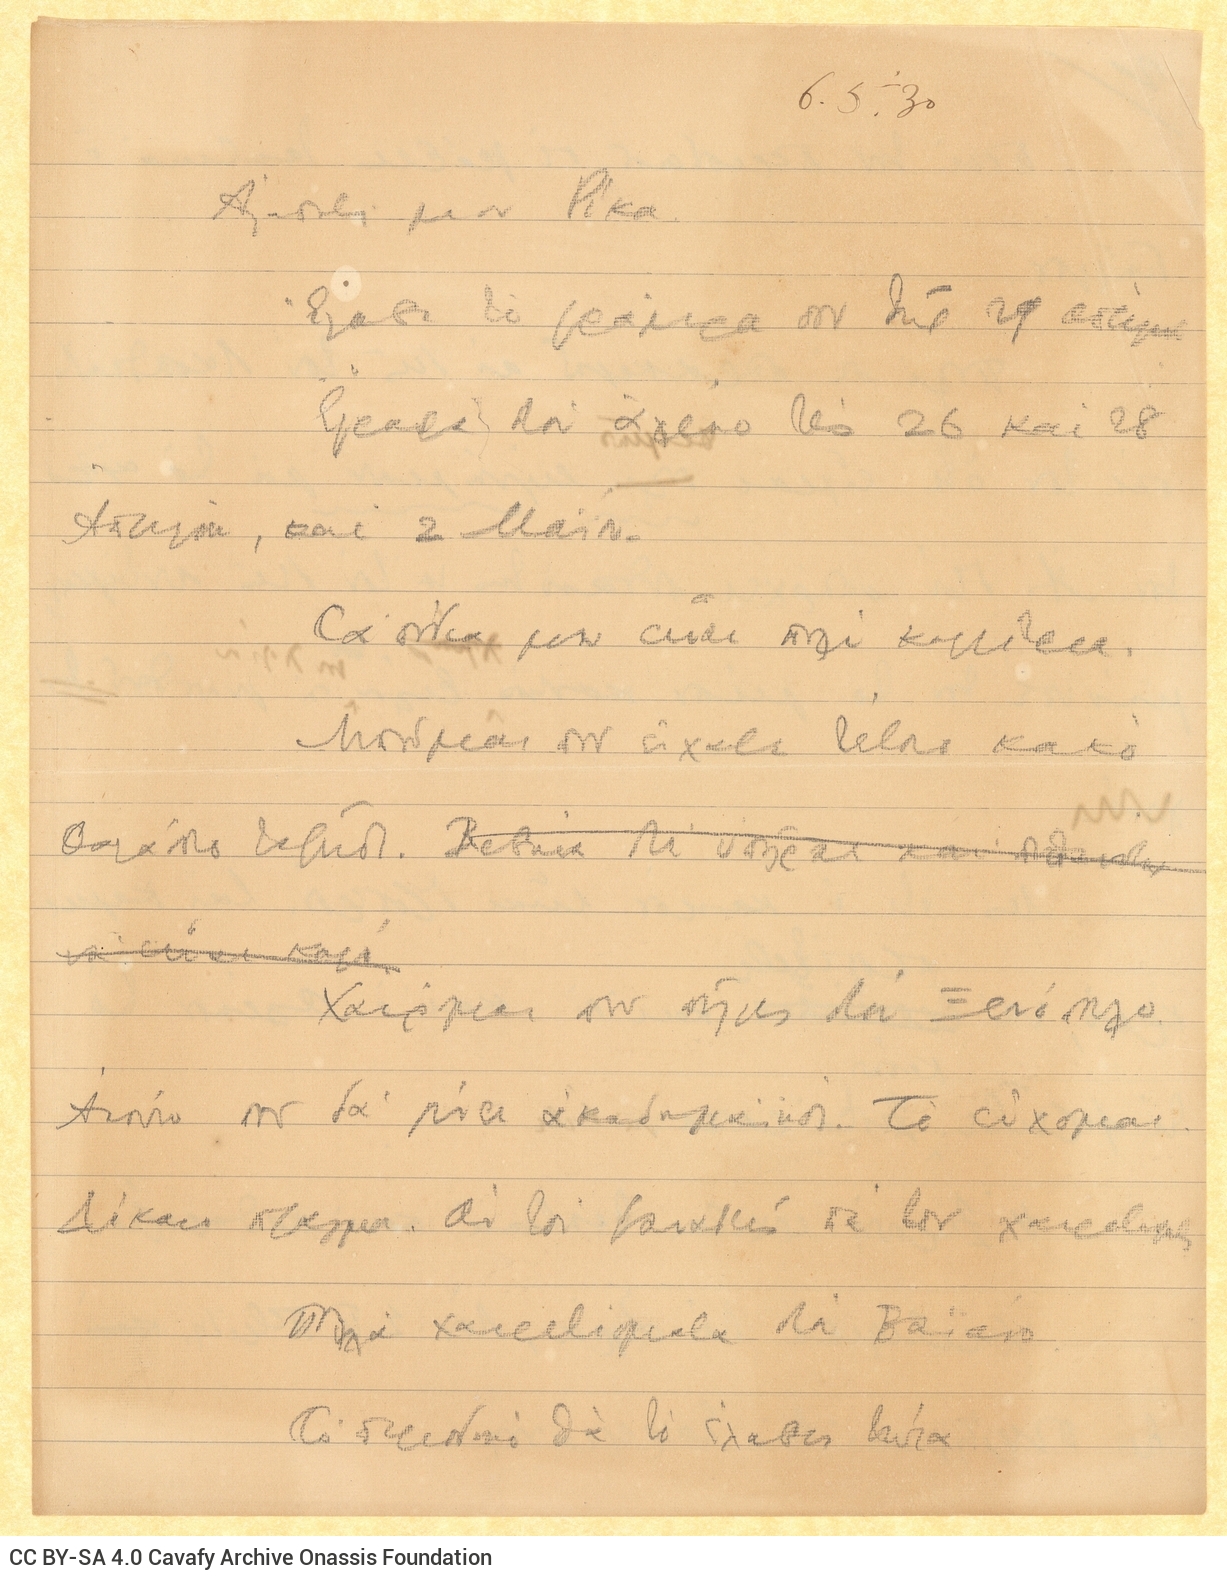 Handwritten draft letter by Cavafy to Rica [Singopoulo] on both sides of a ruled sheet. Pages 2-4 are numbered. The poet asks